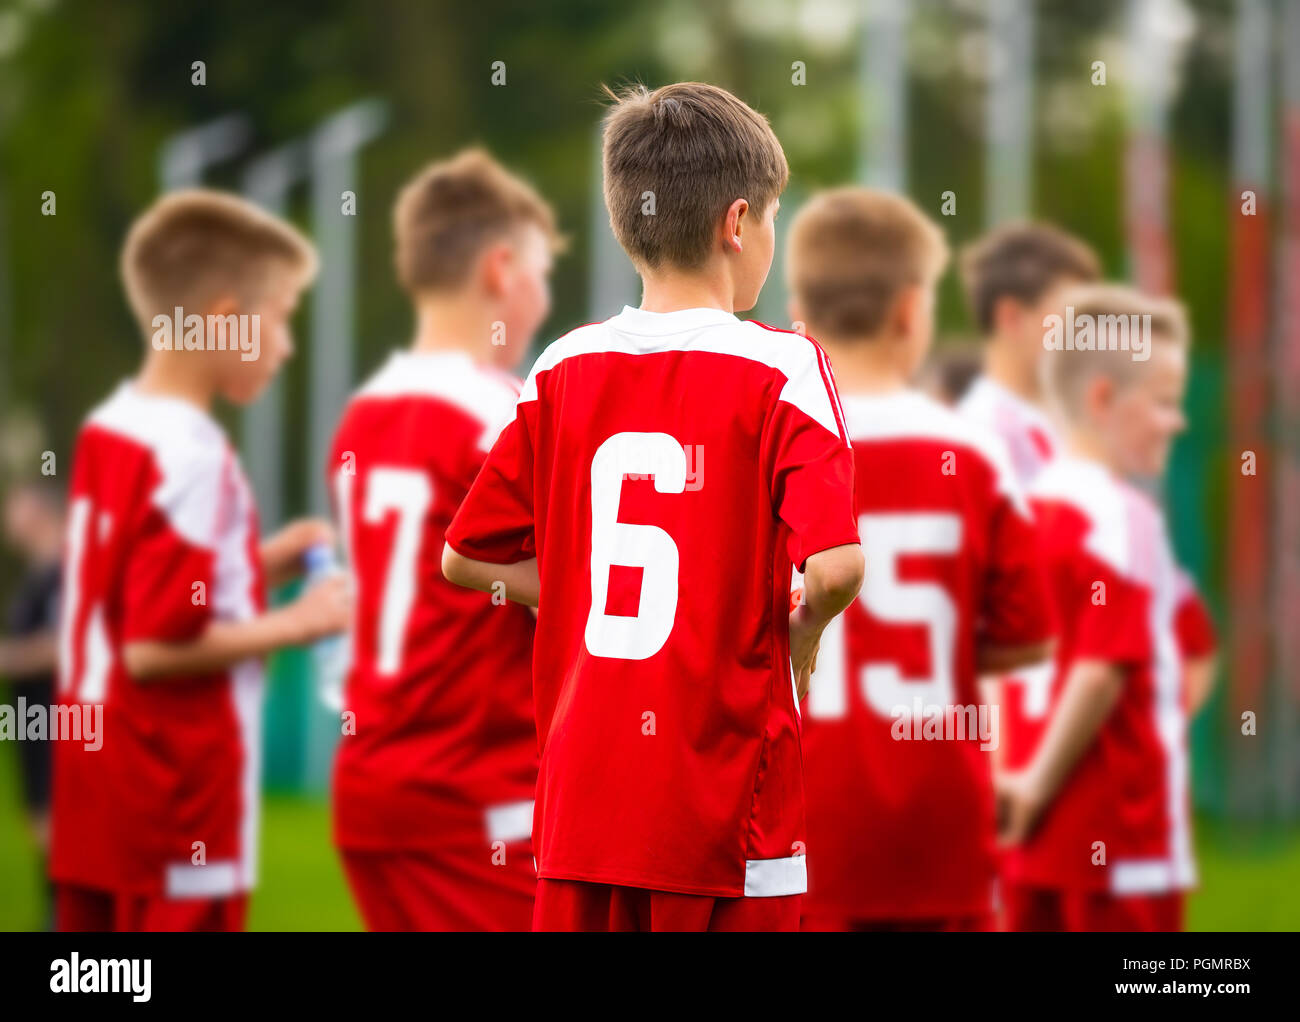 Boys football team together. Young football soccer players in jersey red sportswear Stock Photo